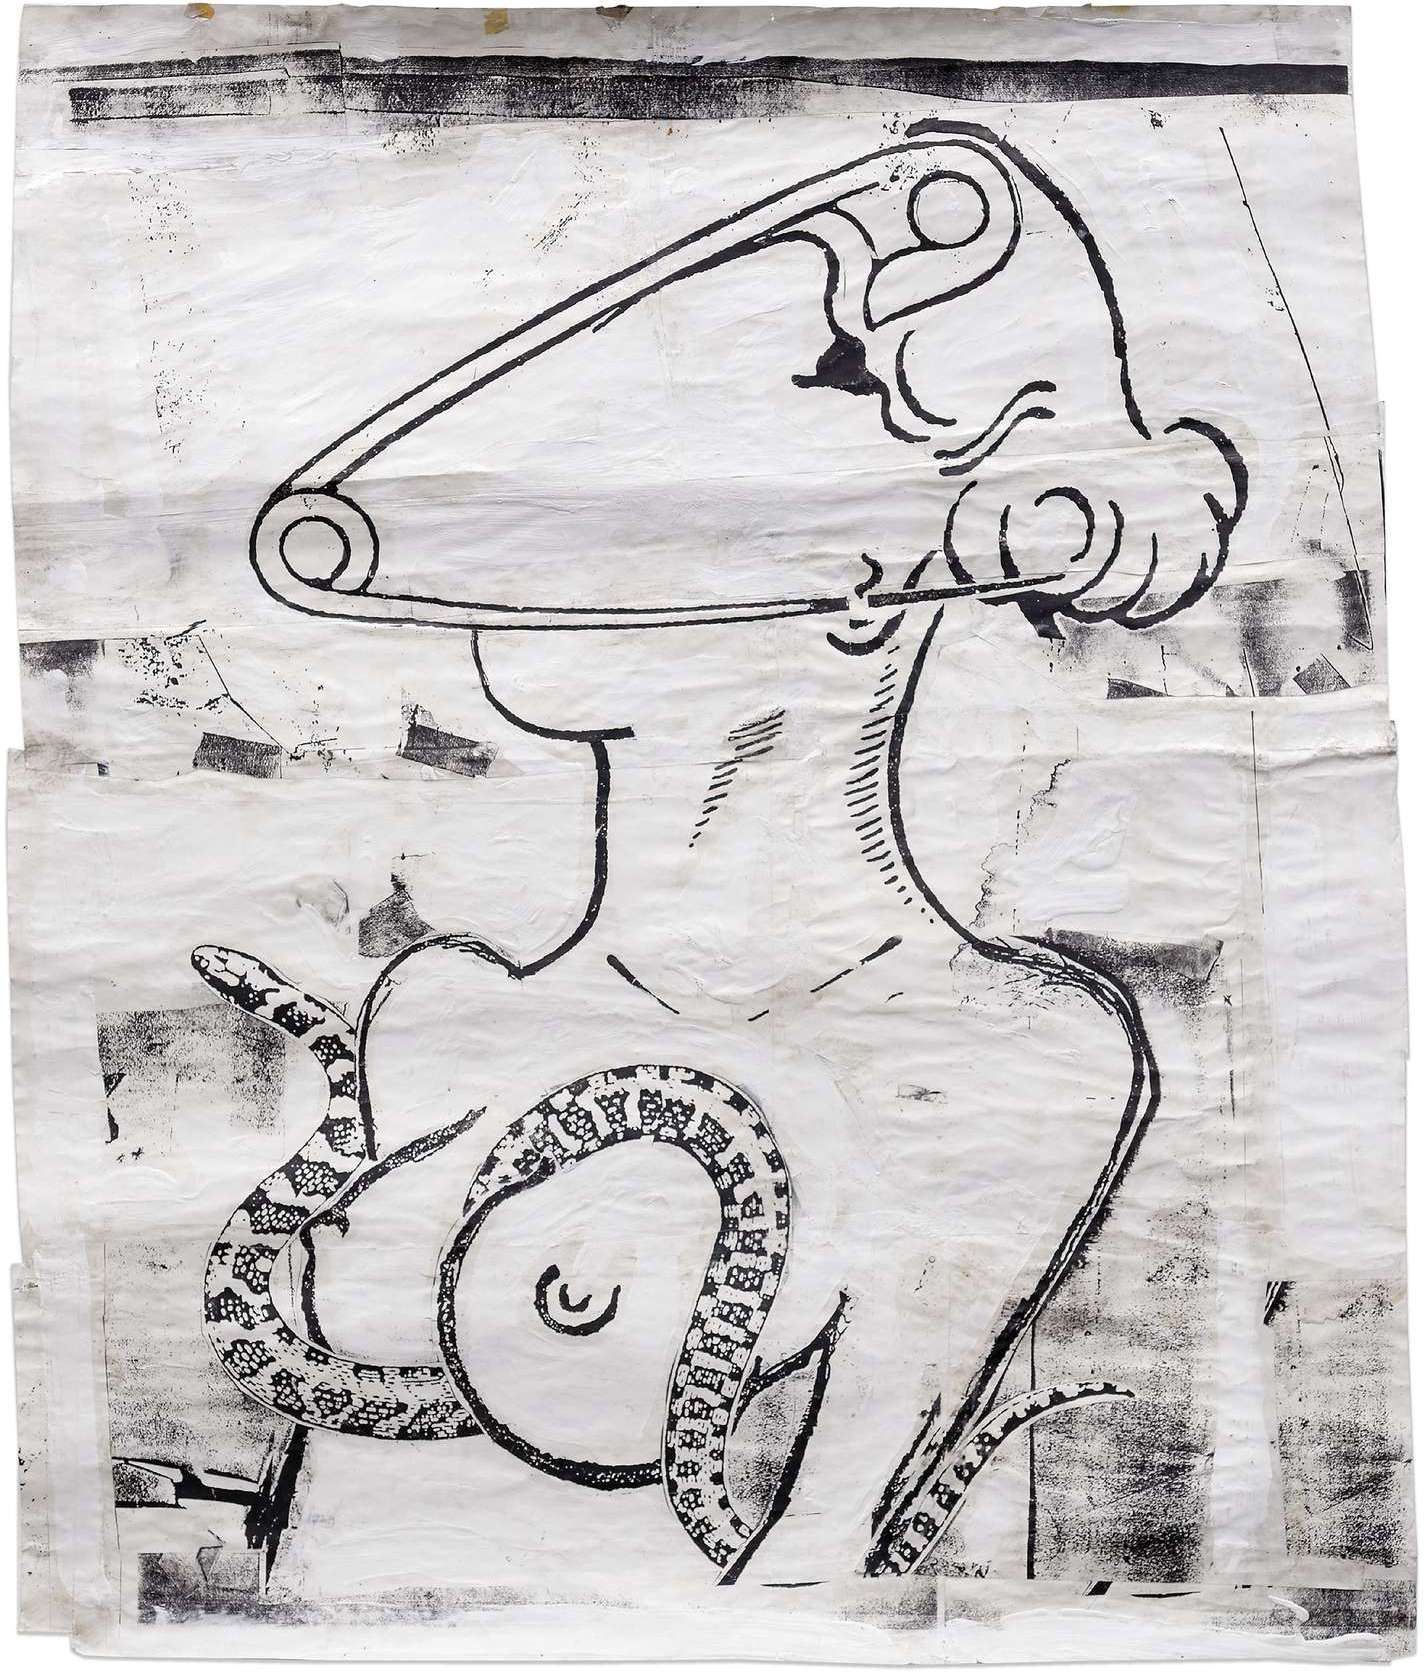 Steve Gianakos, It looked simple but did not always act that way, 2008 Techniques mixtes sur papier83 × 68 cm / 32 5/8 × 26 6/8 in.